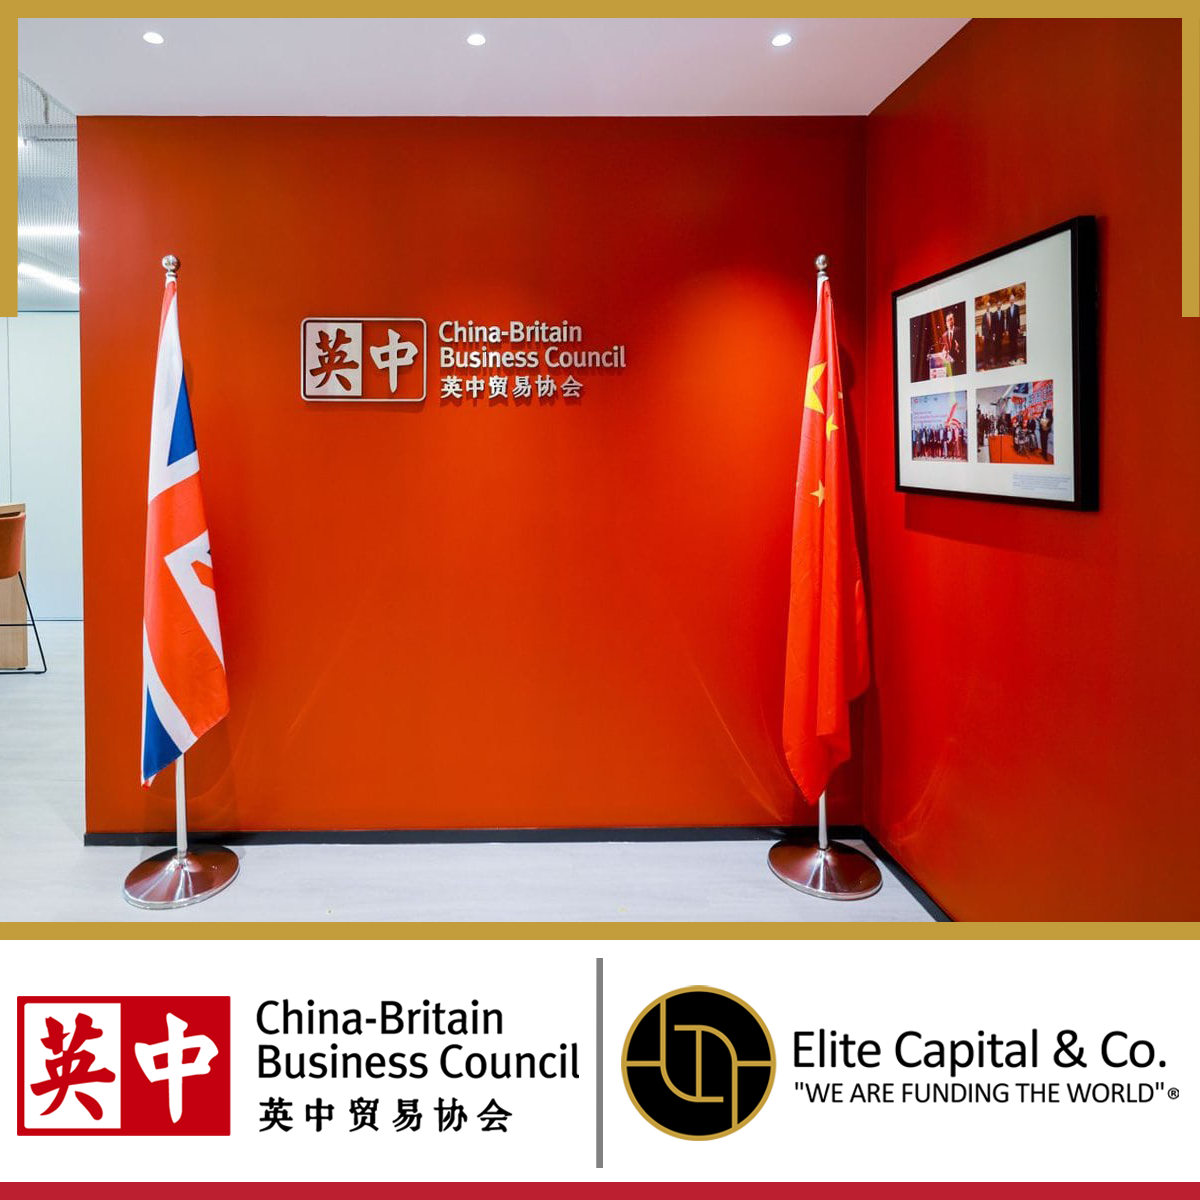 Elite Capital & Co. Limited Strengthens its Global Standing by Joining the China-Britain Business Council